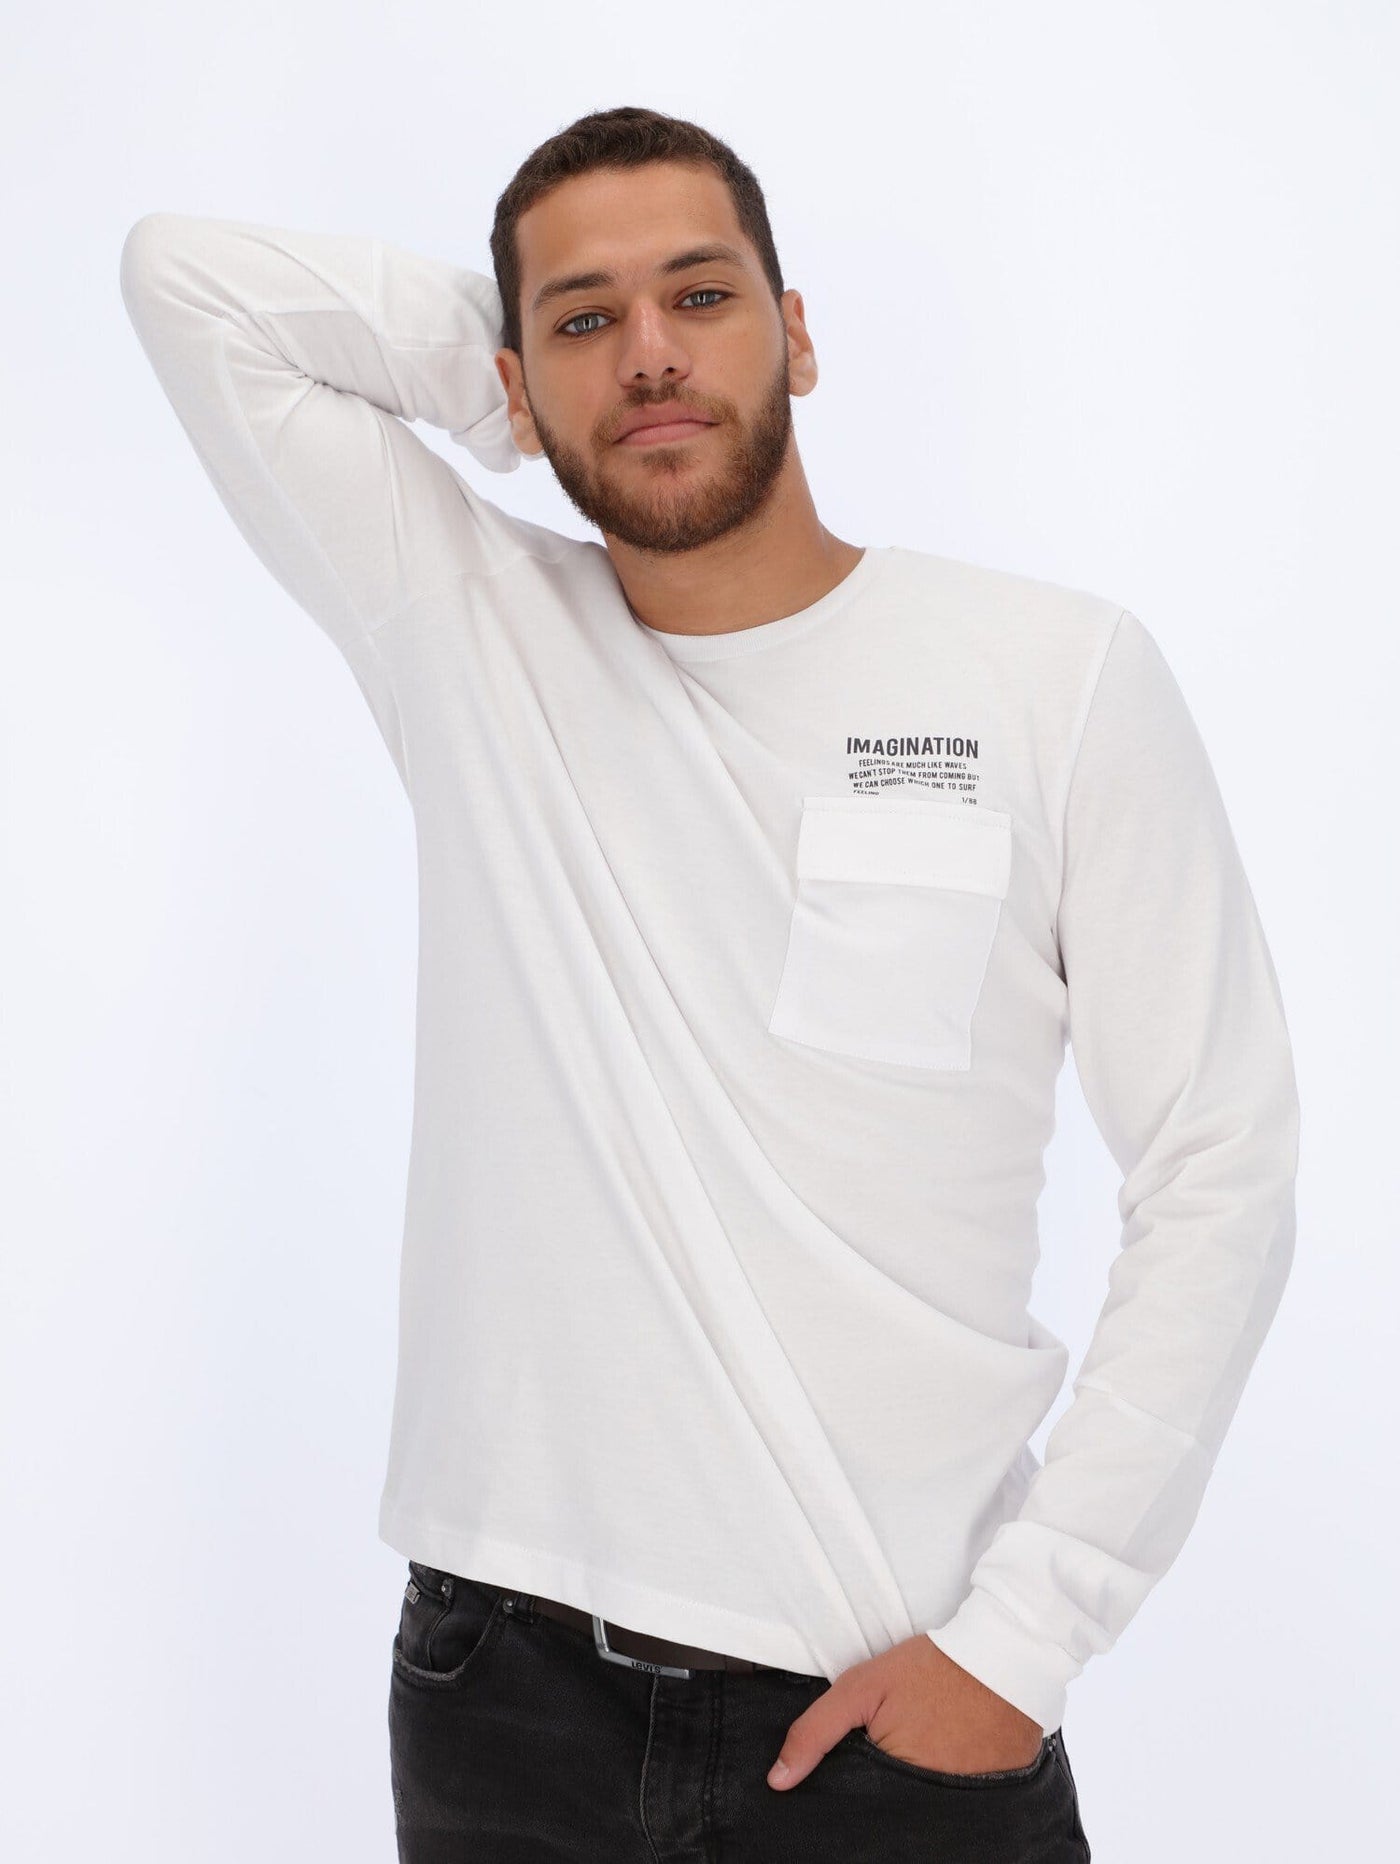 OR knitwear WHITE / L Long Sleeve T-shirt with Folded Chest Pocket